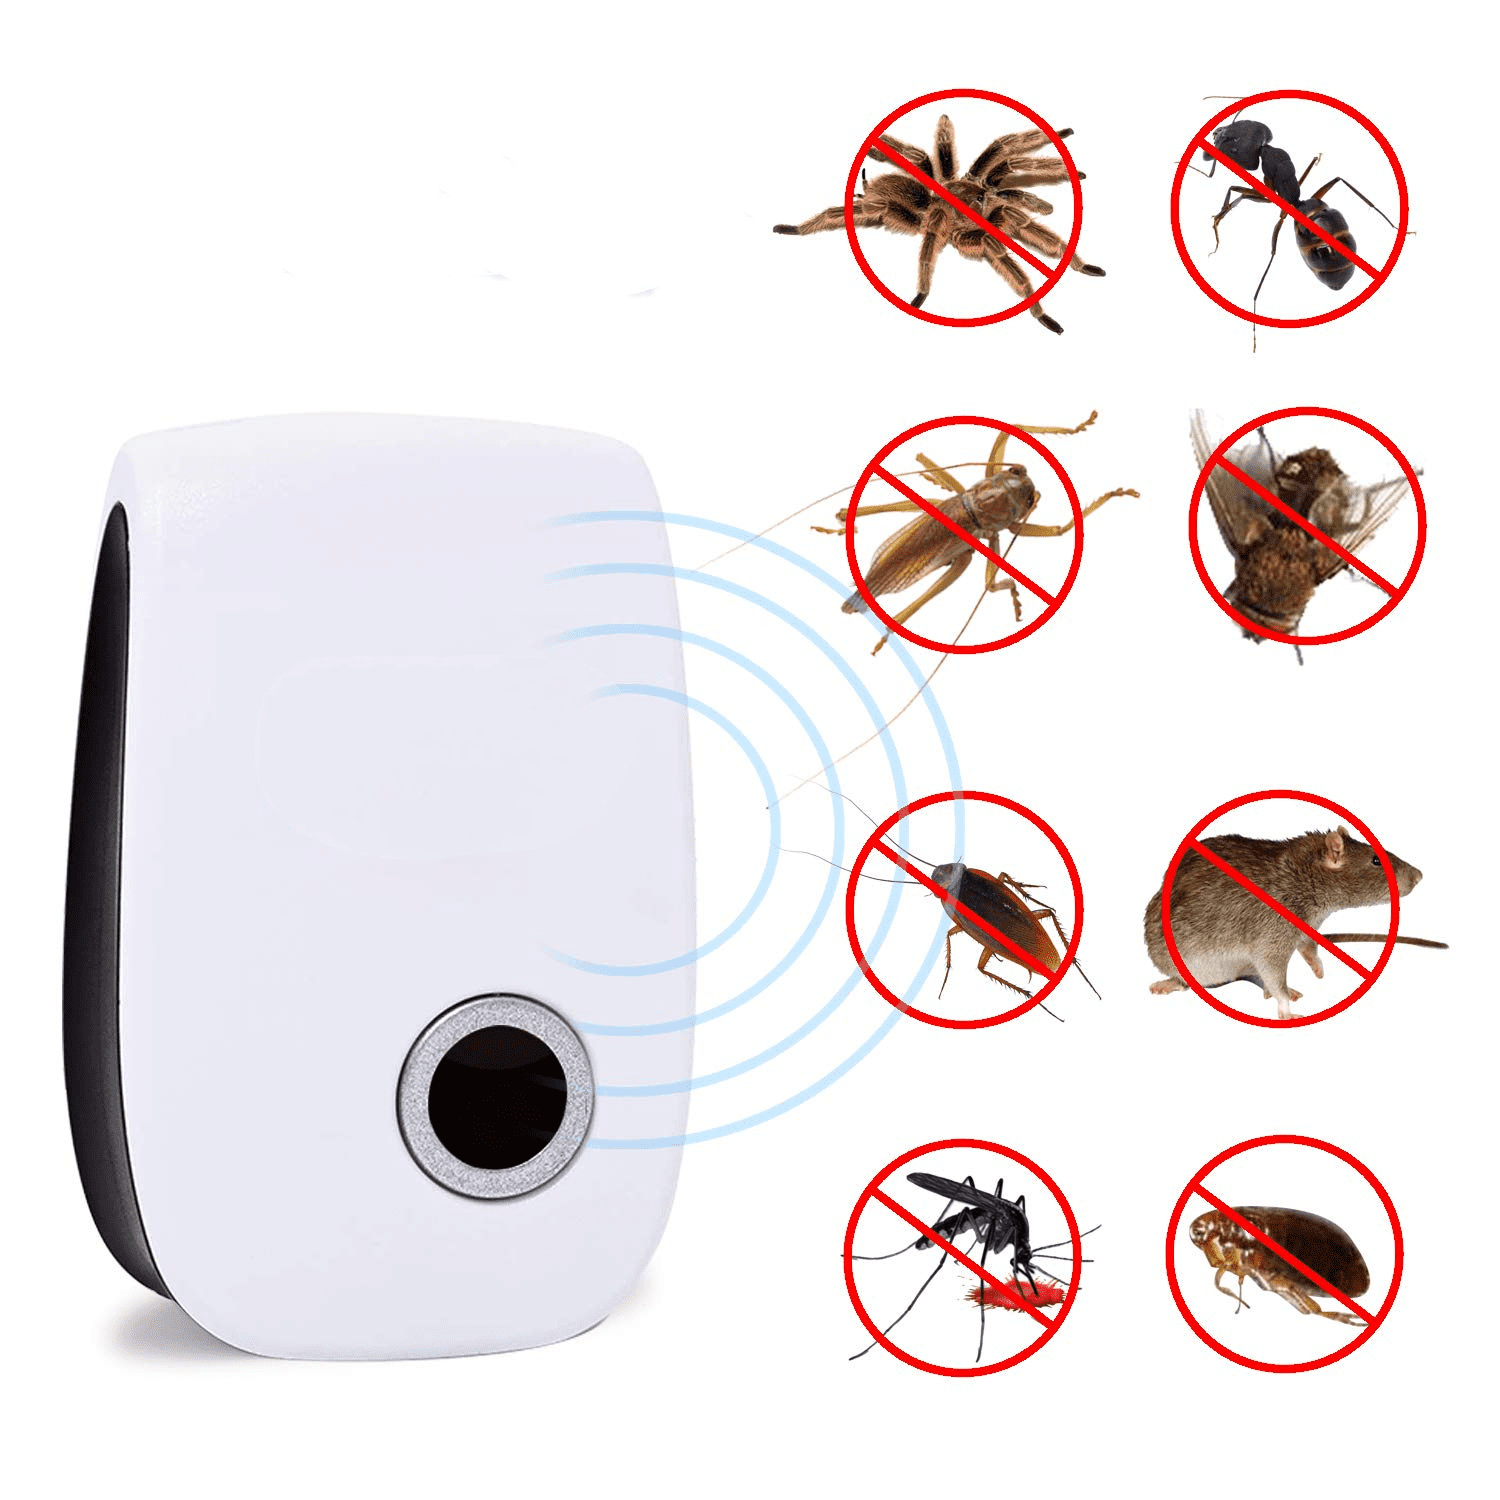 UPGRADED ULTRASONIC PEST REPELLER CONTROL RAT COCKROACH ANT FLY FLEA PESTS 2TYPE 